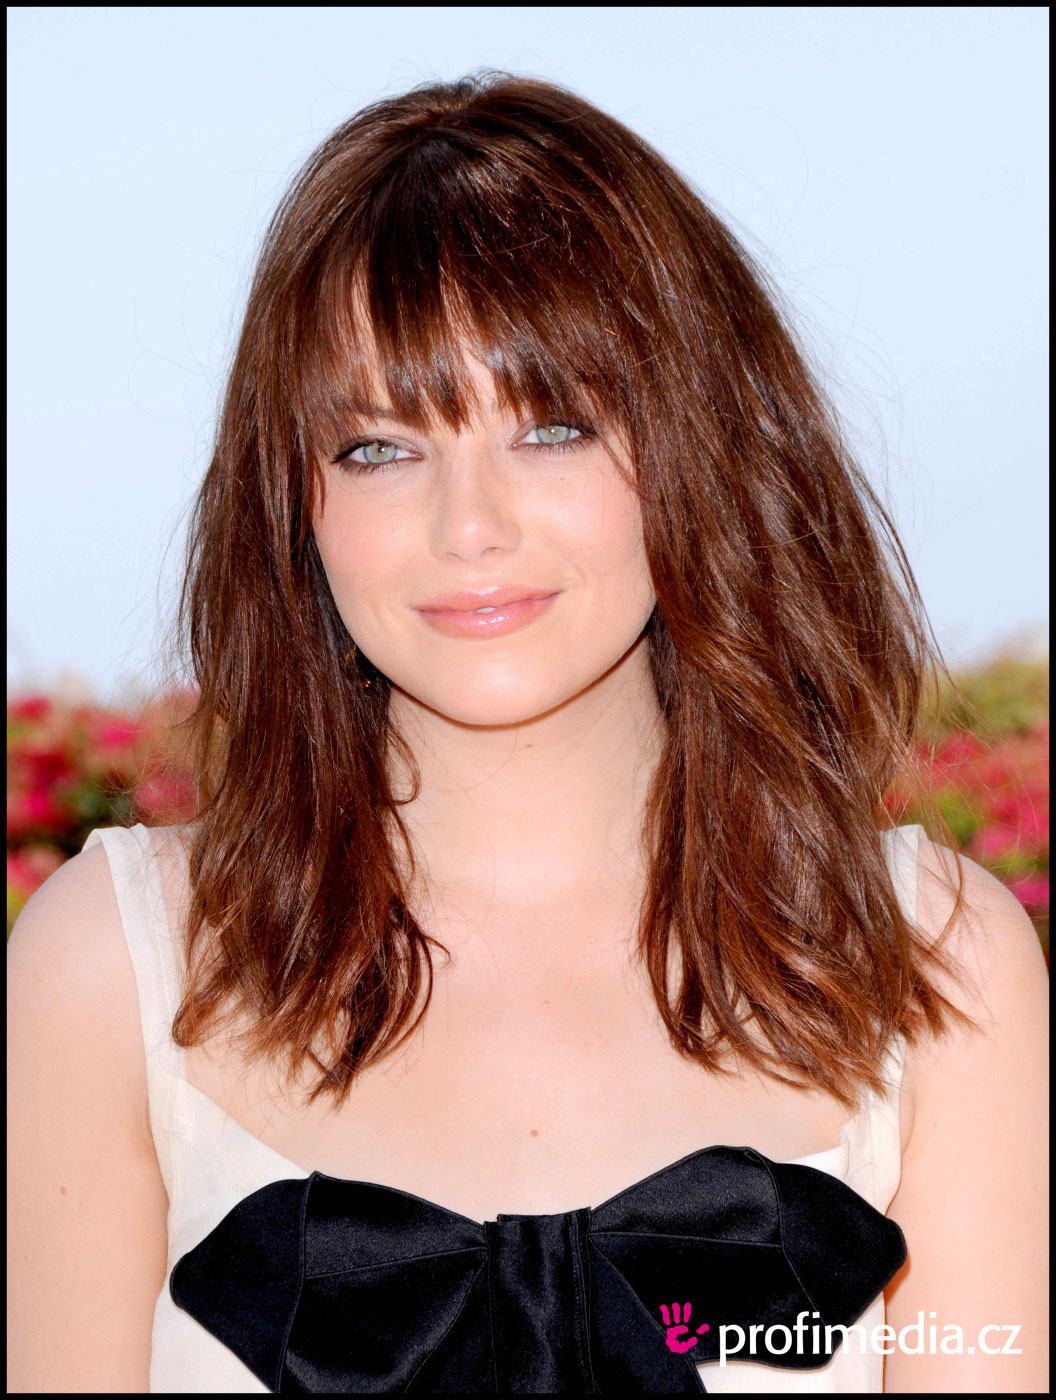 Hairstyles For Celebrity, Celebrity Hair Styles, celebrity Hairstyles, Celebrity Hair